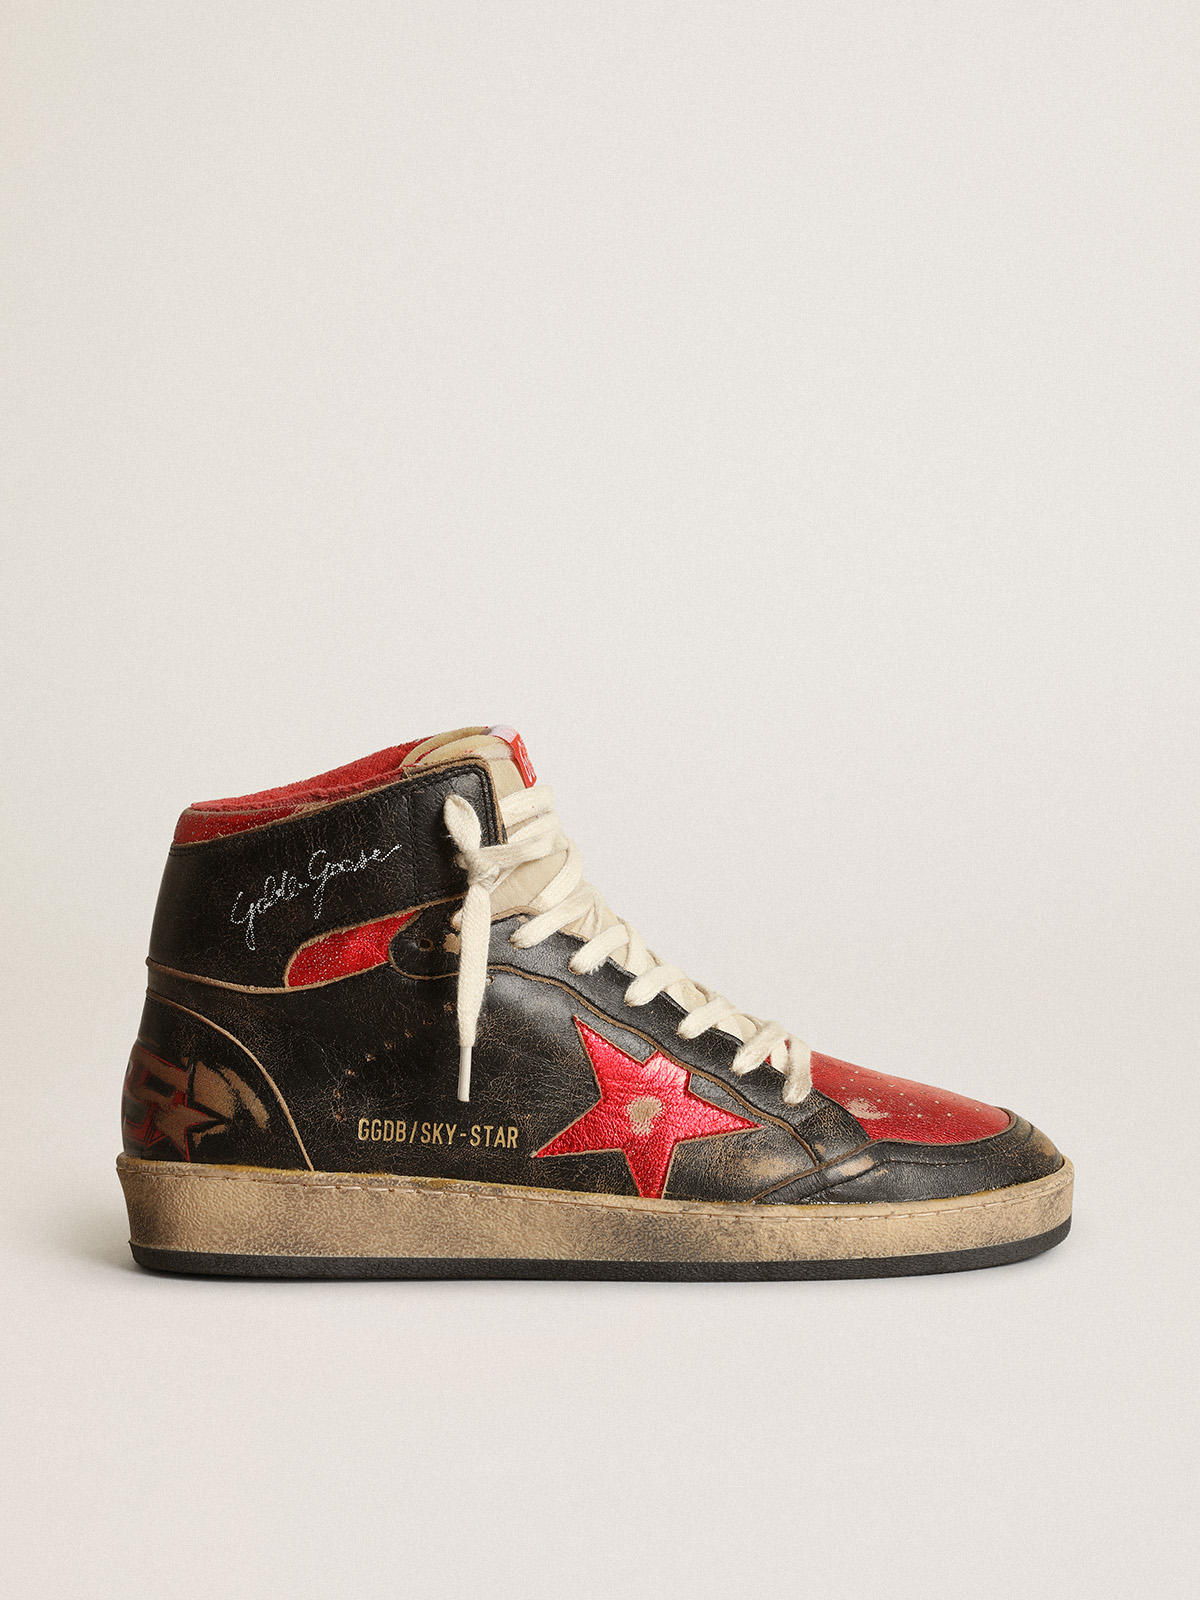 Women's Sky-Star in black glossy leather with red star